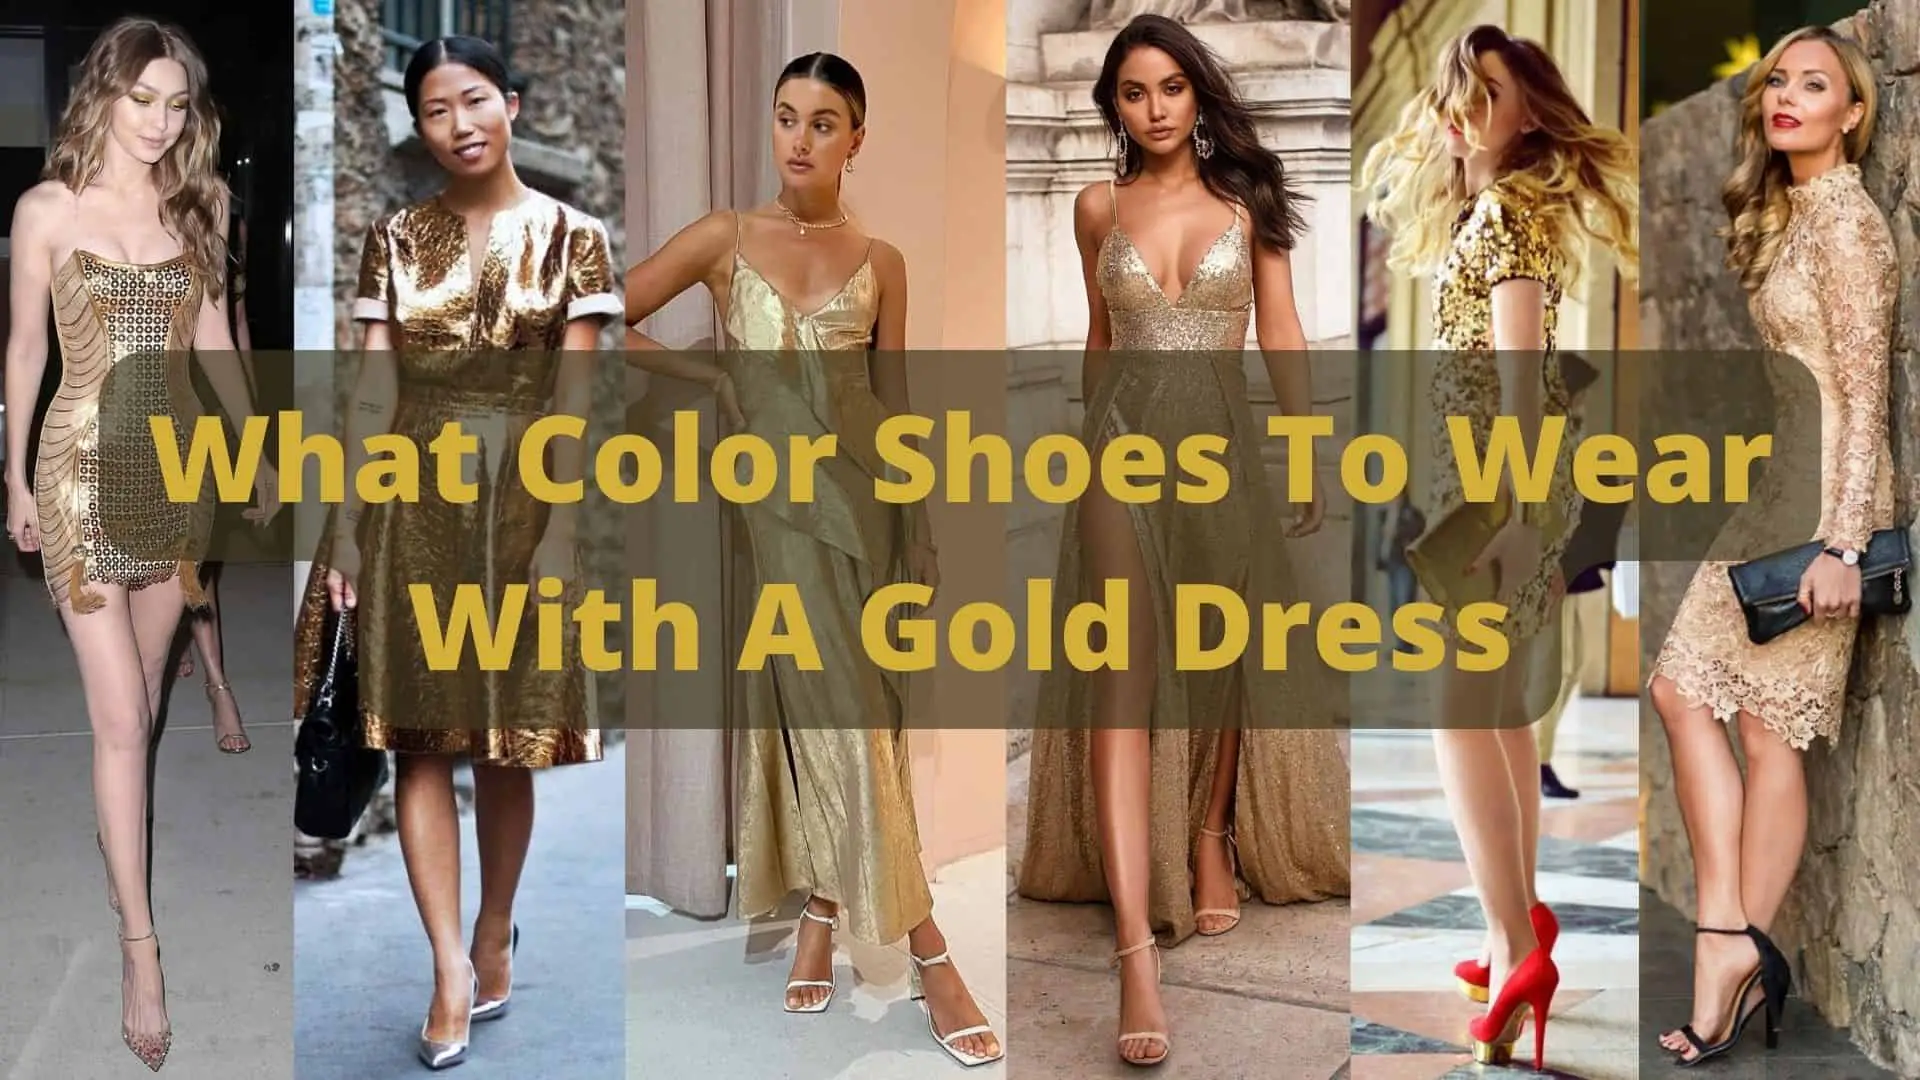 What Color Shoes To Wear With A Gold Dress